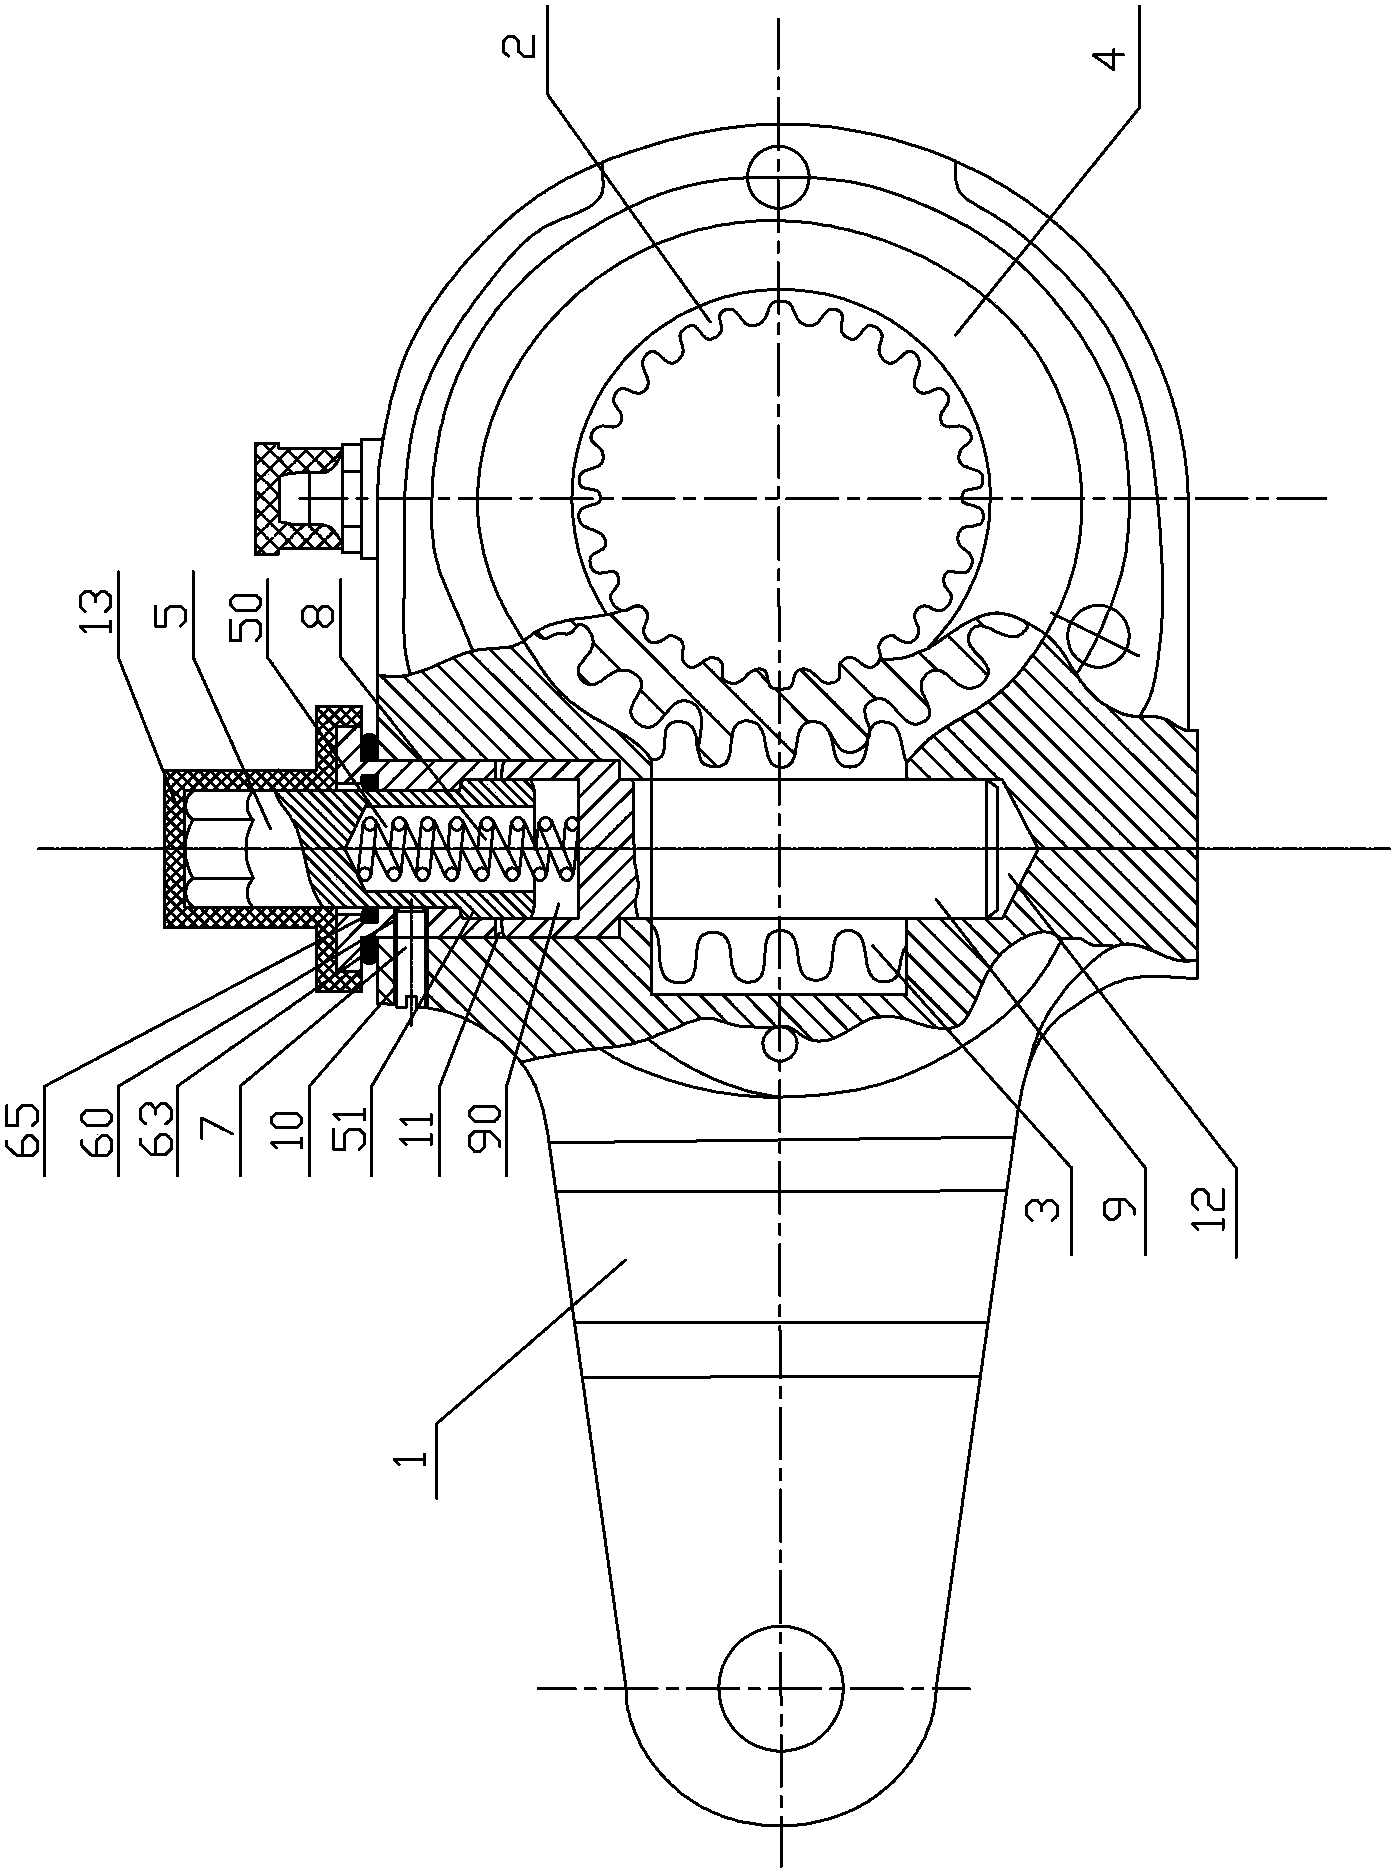 Structurally improved manual adjustment arm capable of automatically locating deadlock